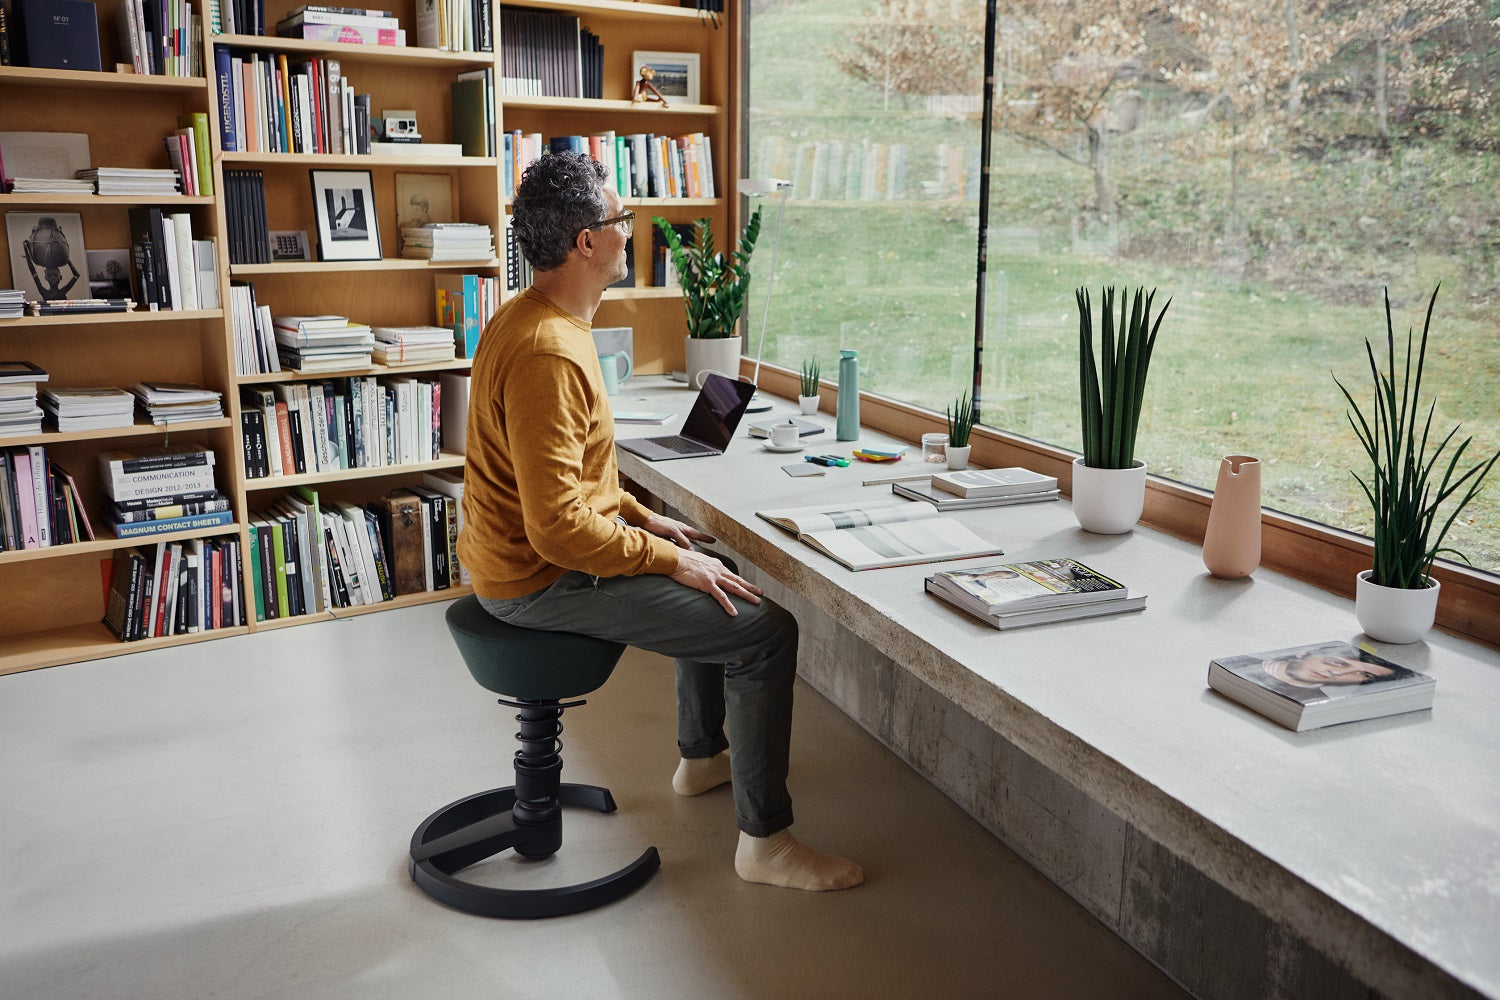 The Aeris Swopper office stool enables ergonomic dynamic sitting in the office and home office.